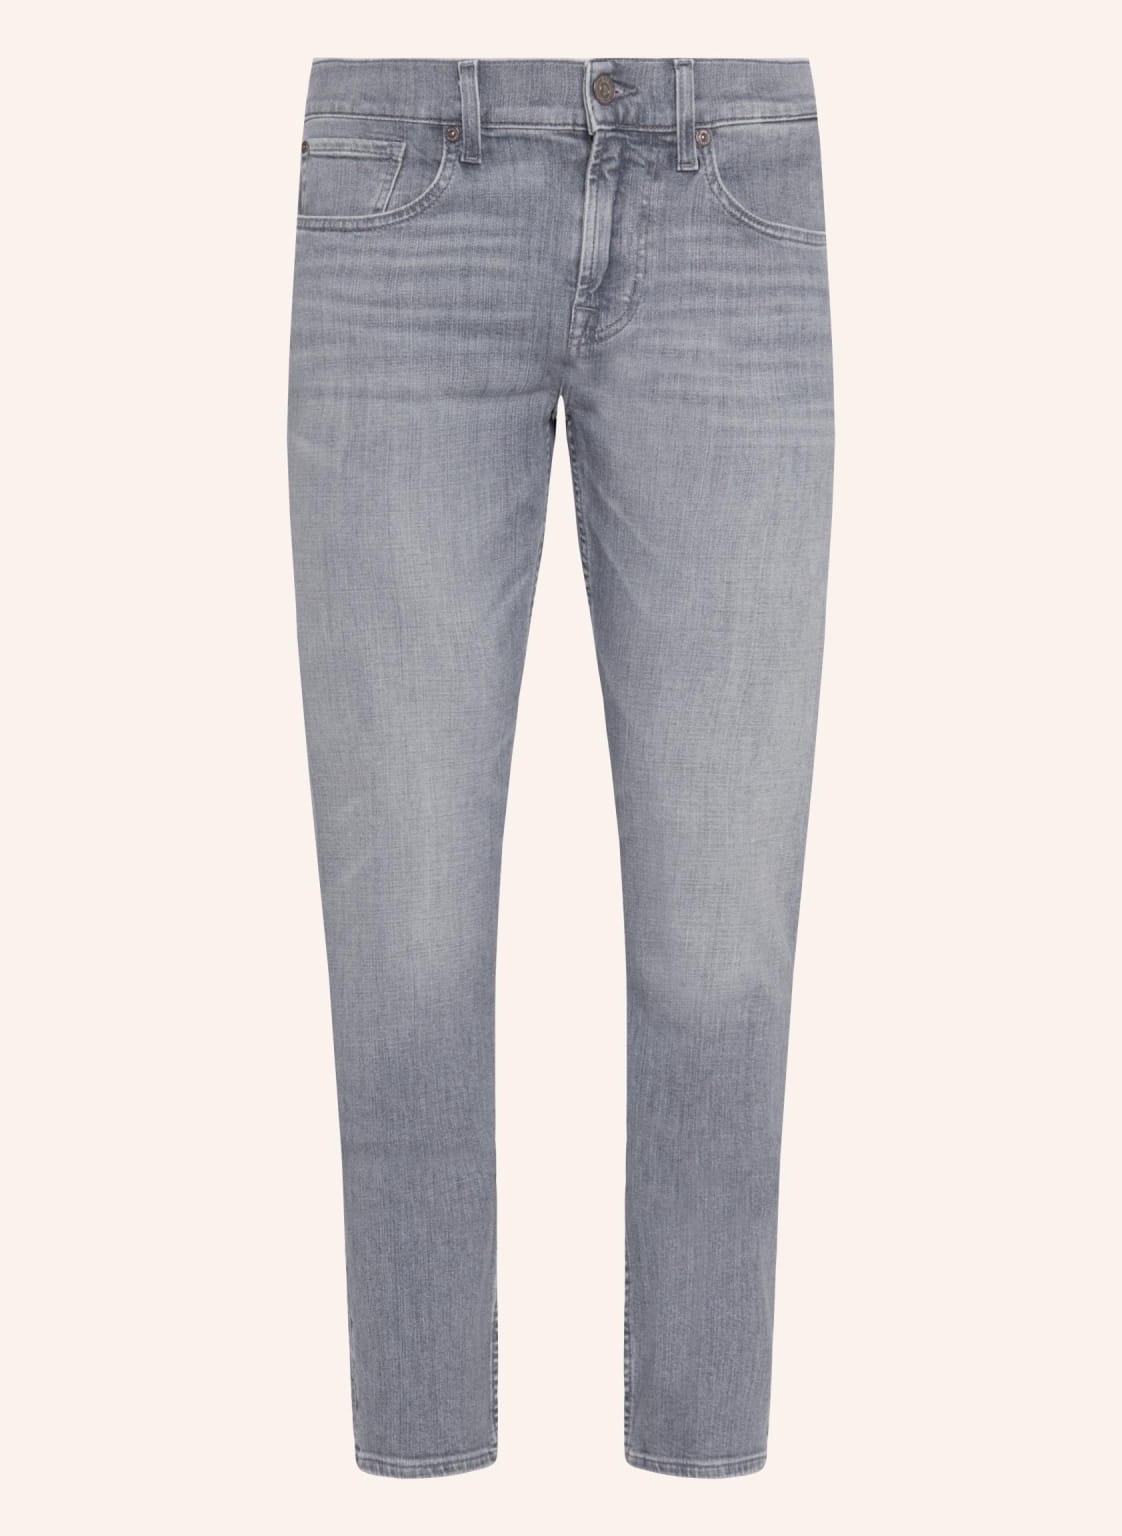 7 For All Mankind Jeans Slimmy Tapered Slim Fit grau von 7 For All Mankind